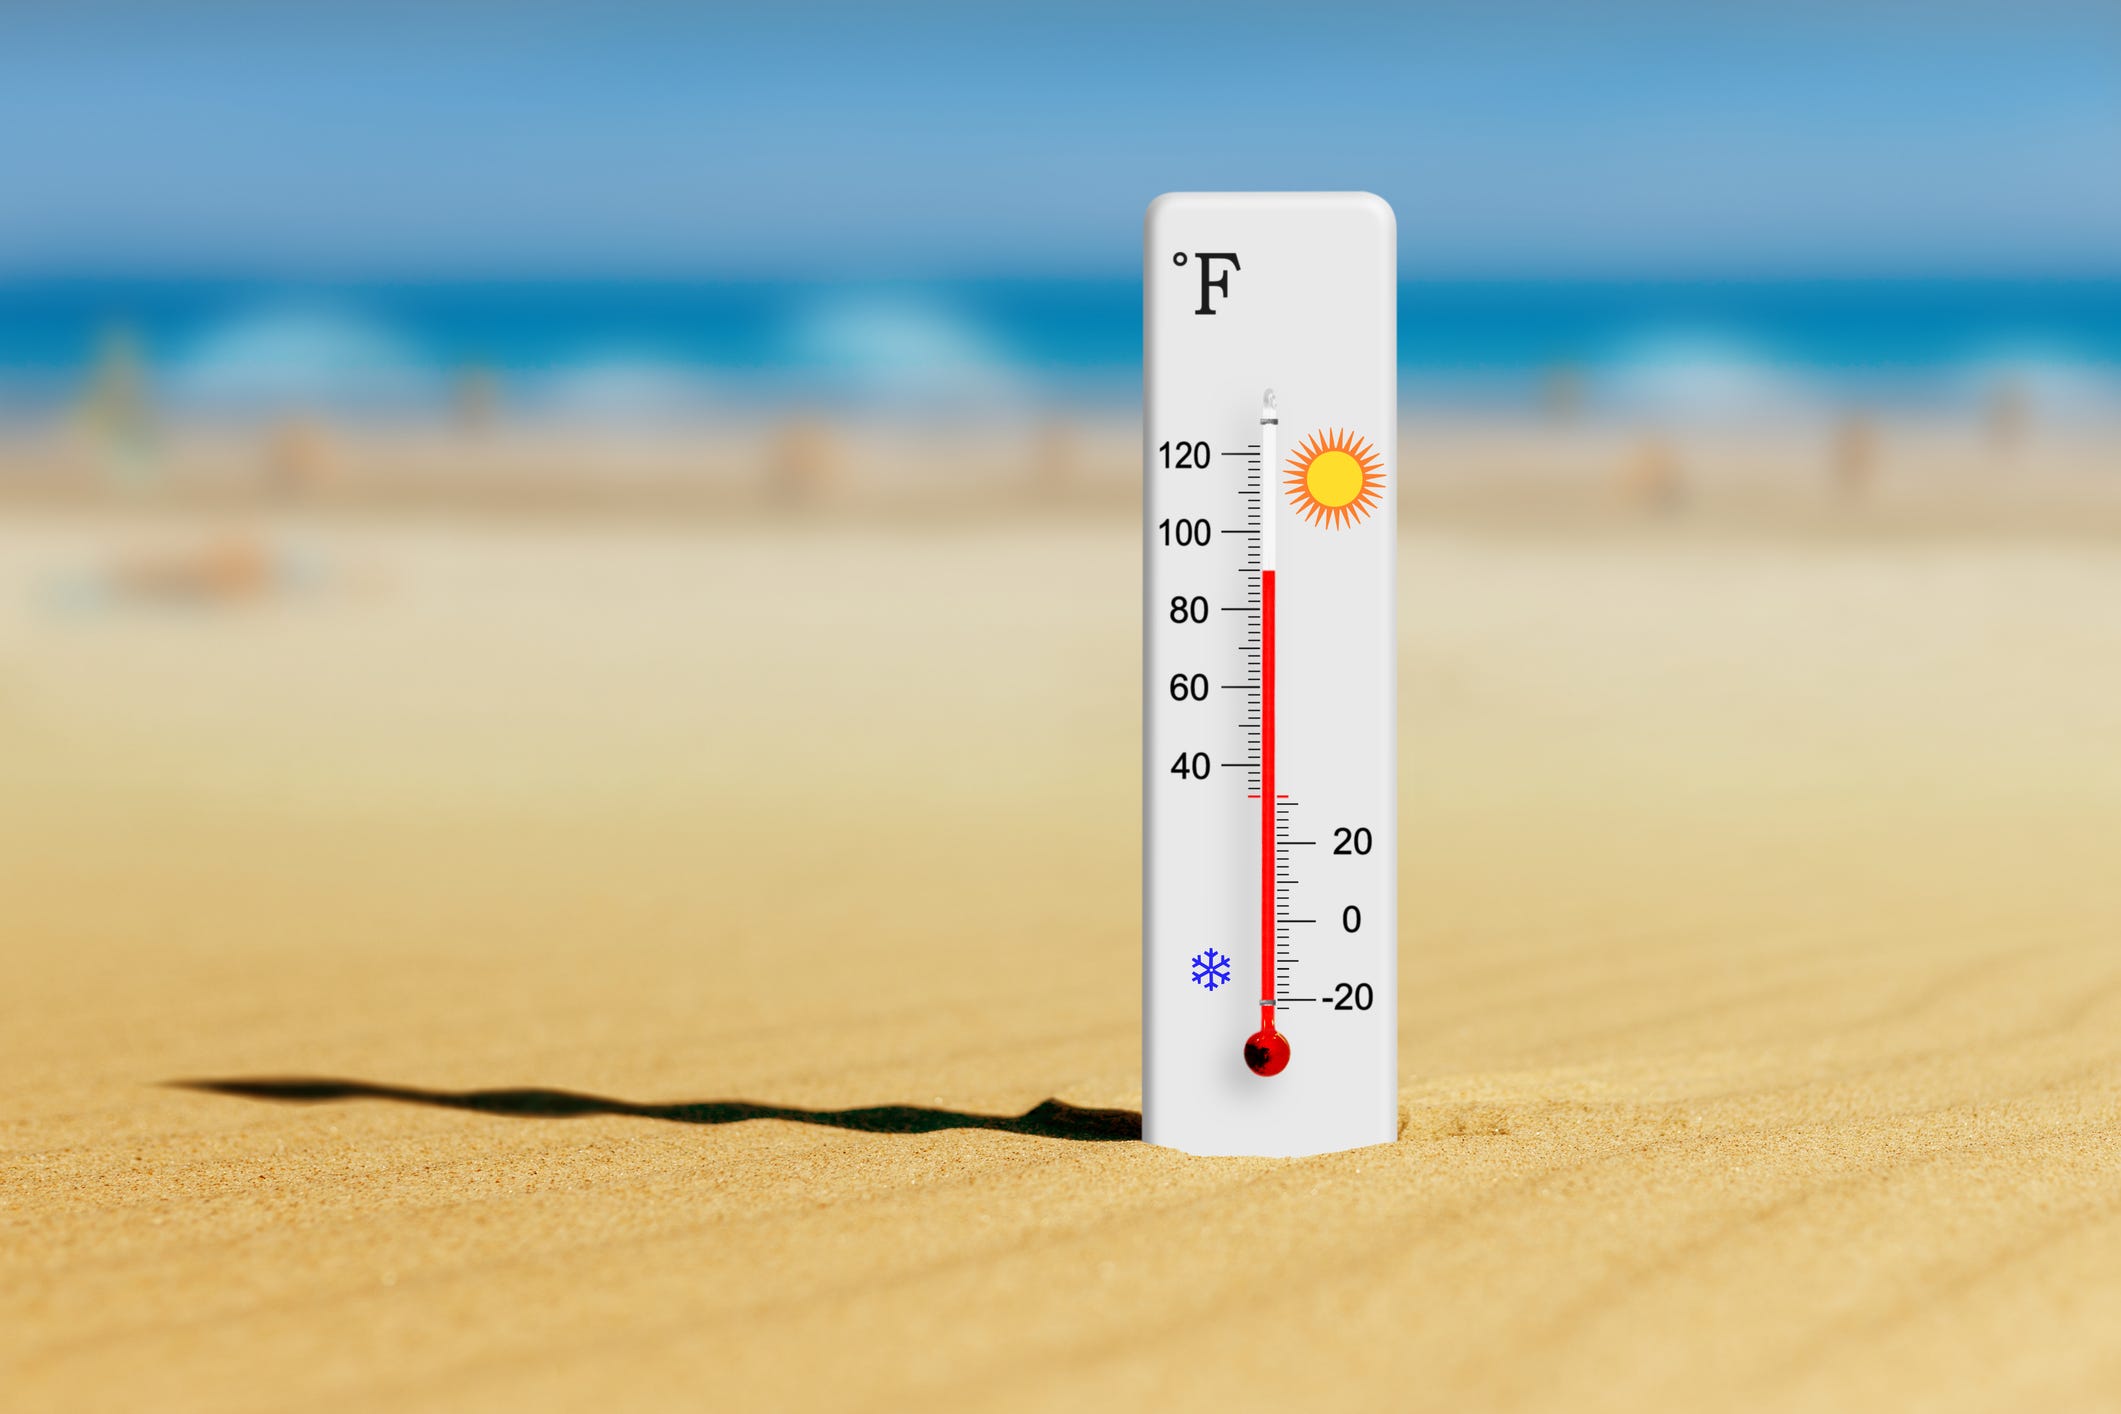 Extreme heat is the number one weather-related killer [Video]